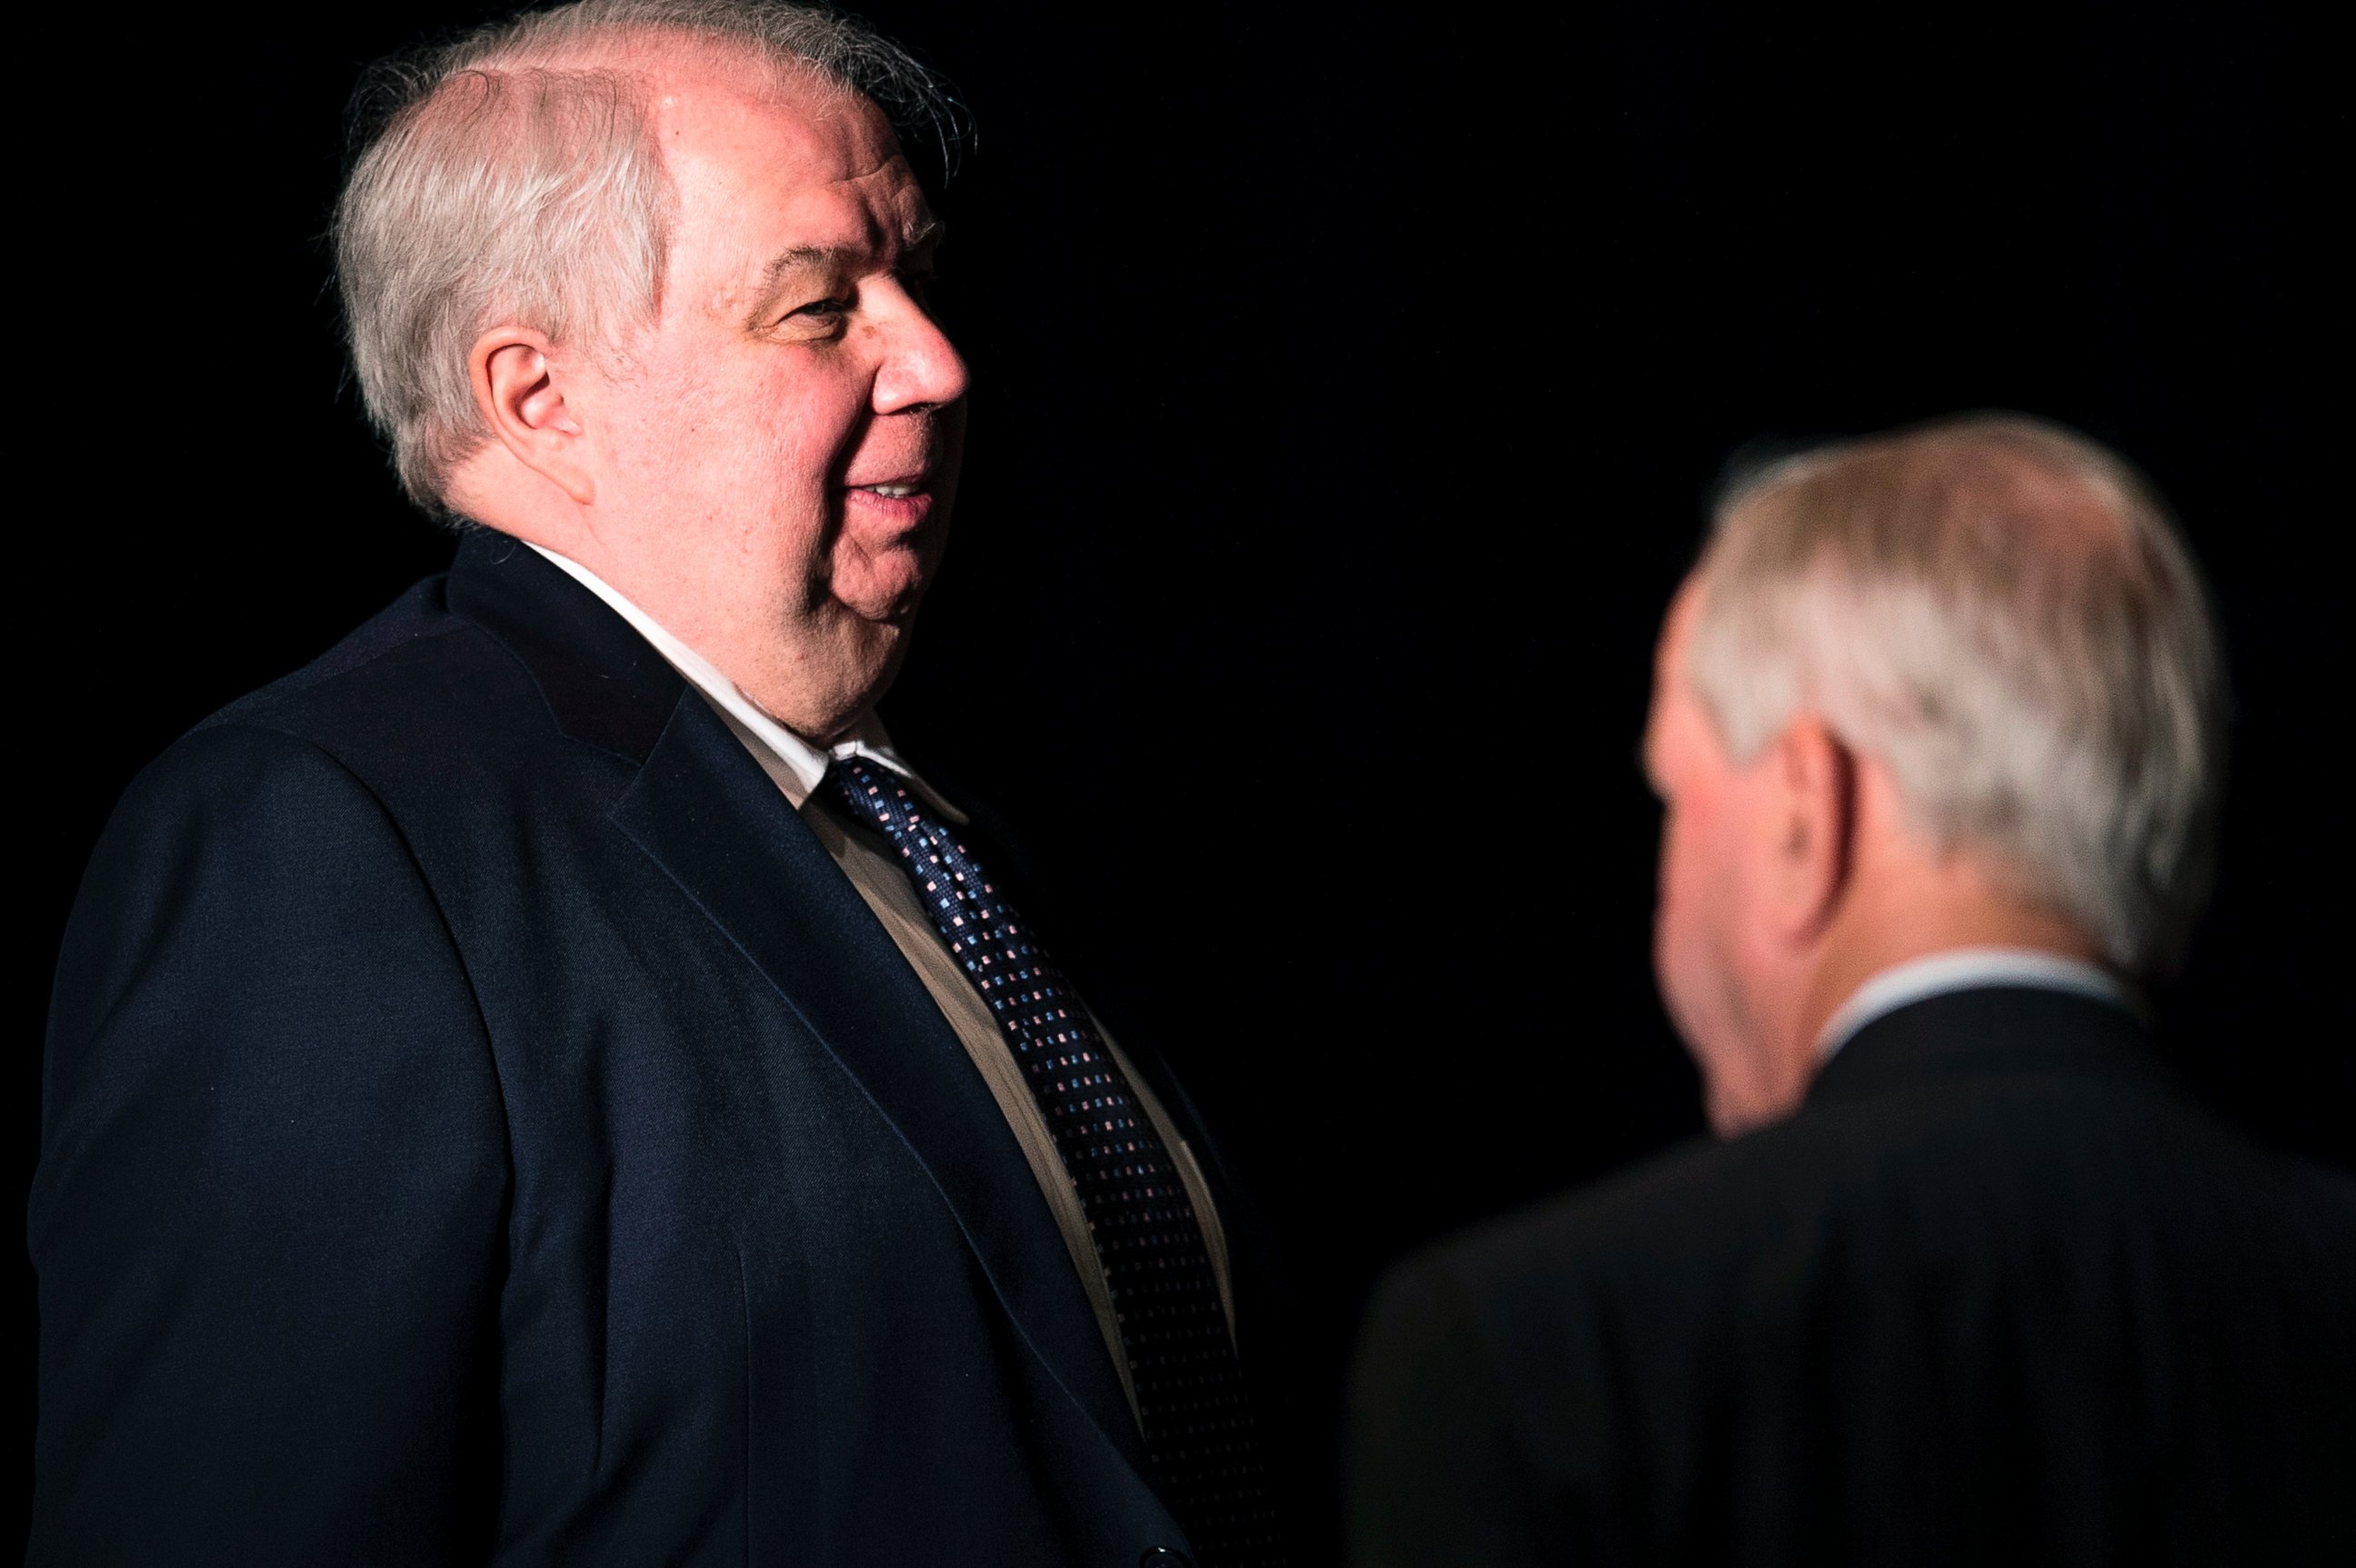 PHOTO: Russian Ambassador to the U.S. Sergey Kislyak, left, leaves the Mayflower Hotel after a foreign policy speech by then Republican presidential hopeful Donald Trump, April 27, 2016, in Washington, D.C. 